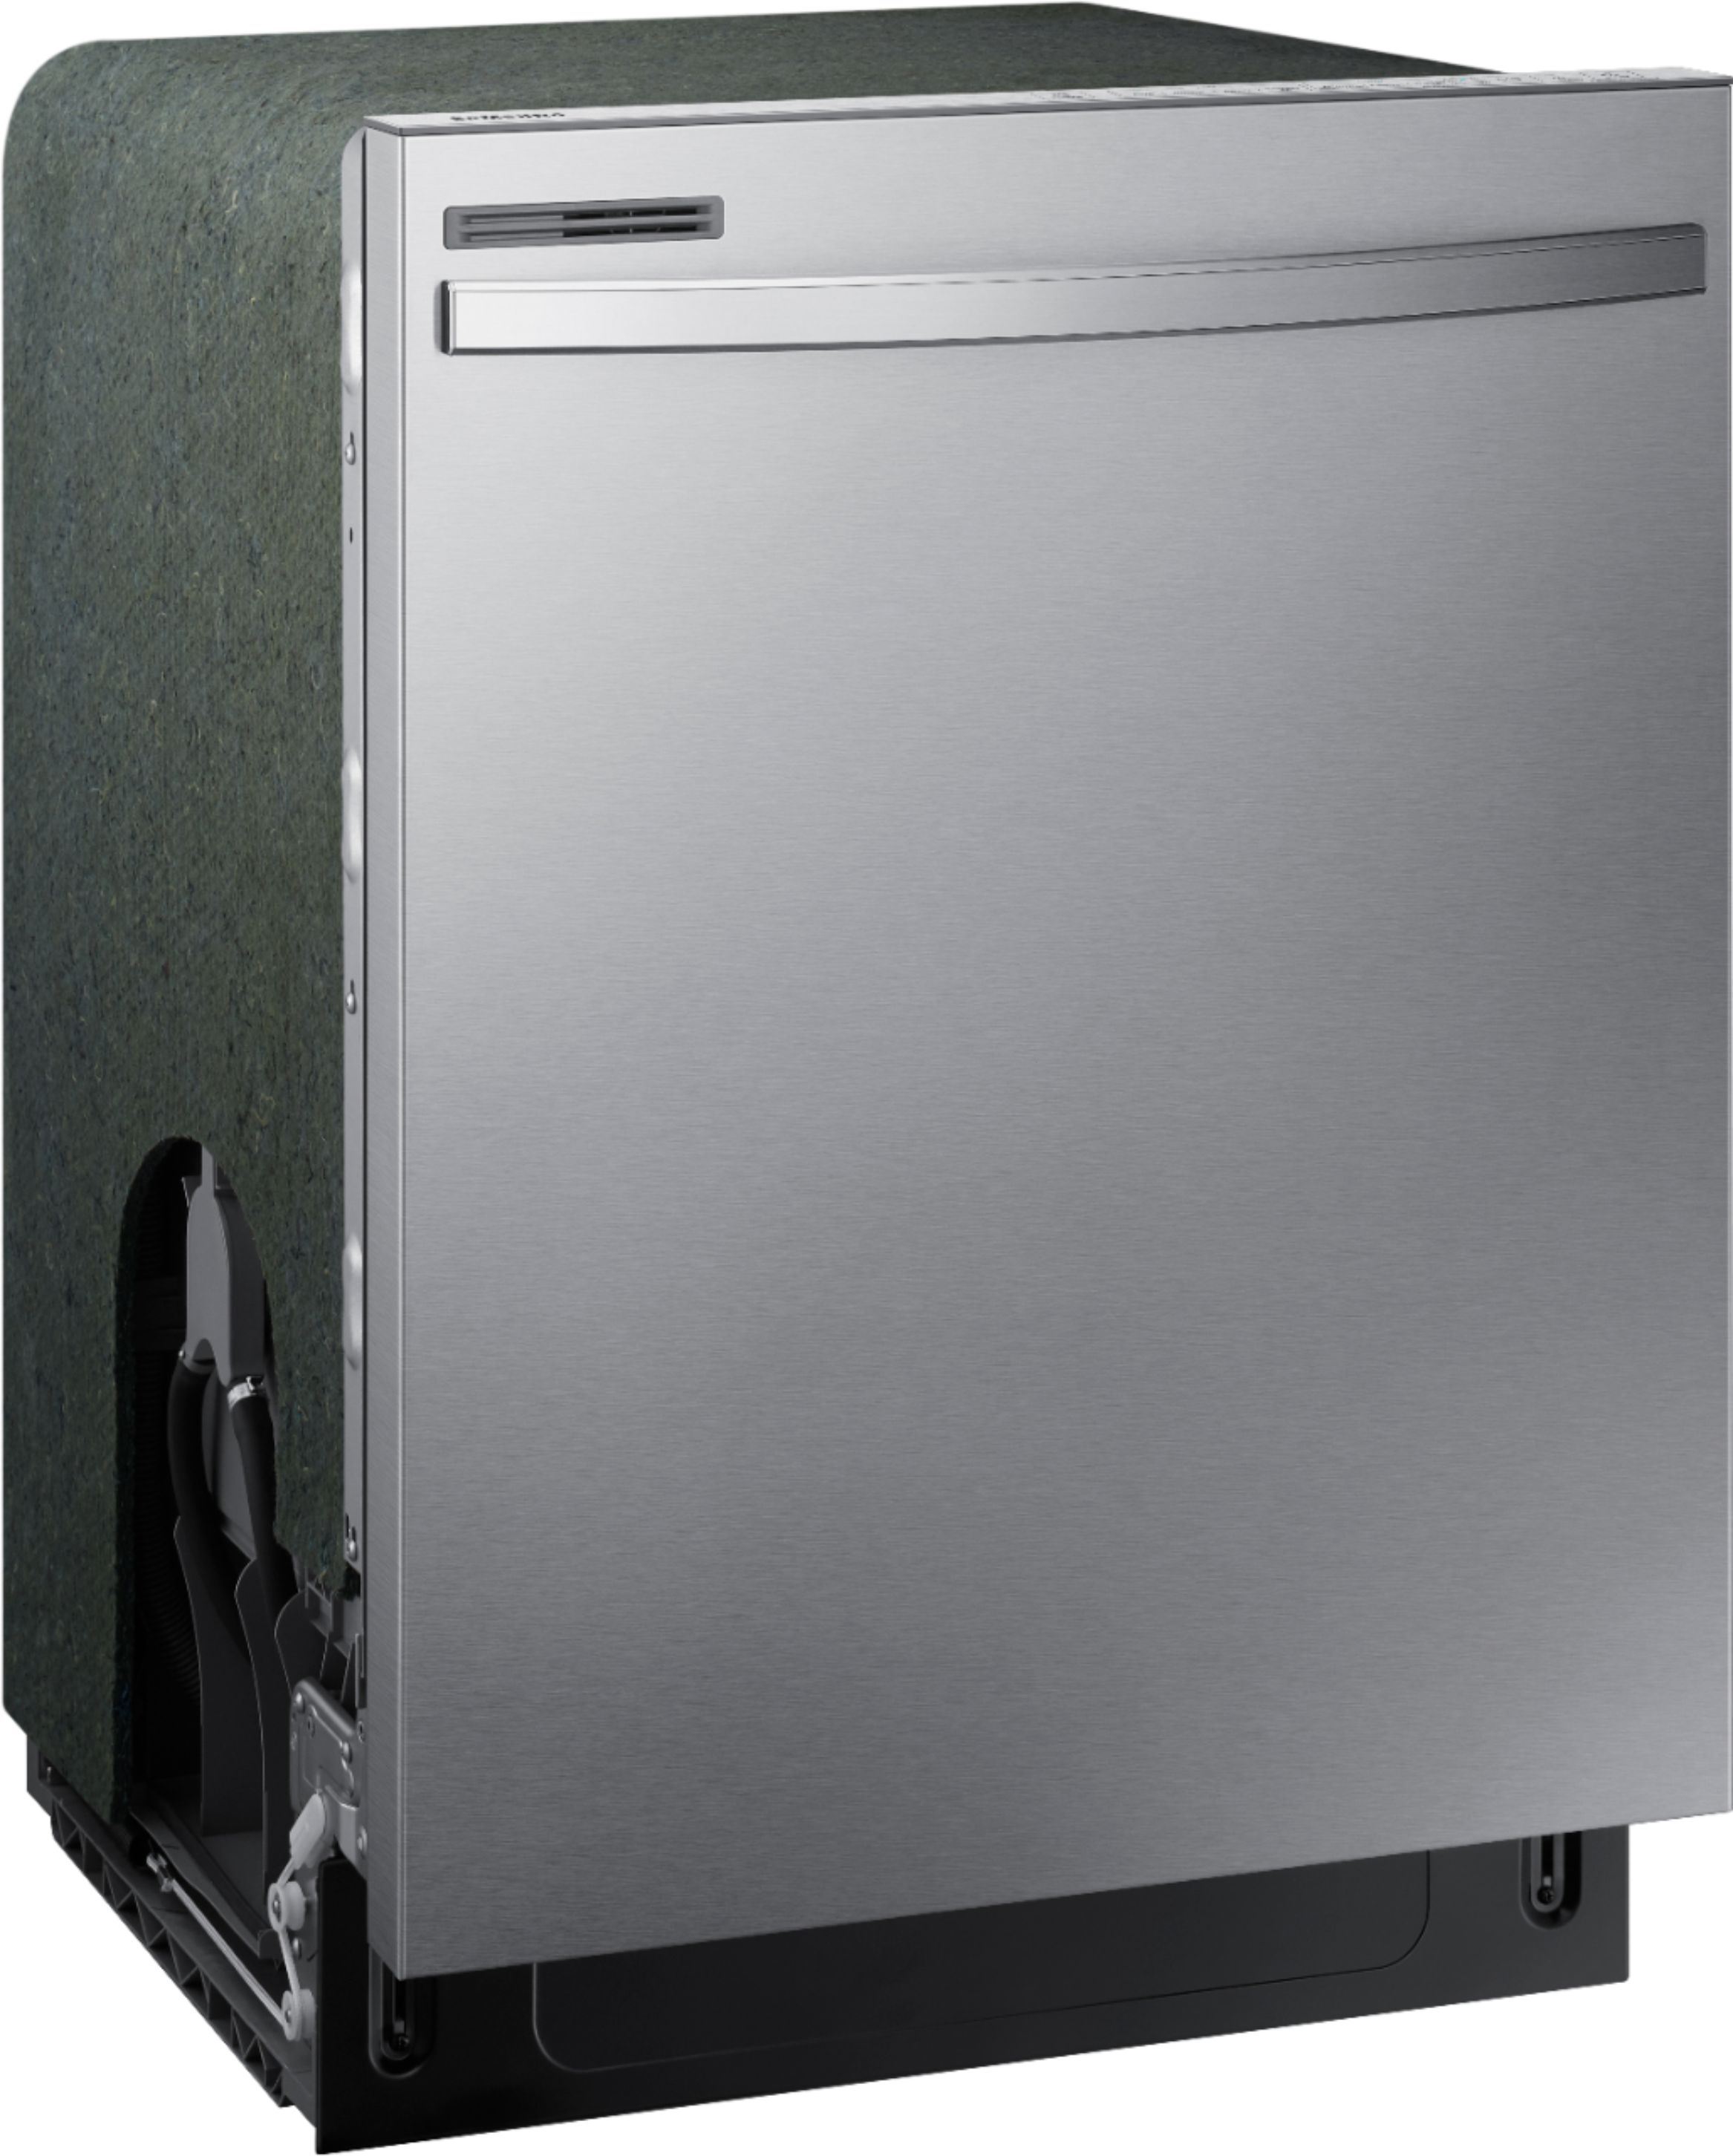 Angle View: Samsung - 24" Top Control Built-In Dishwasher - Black